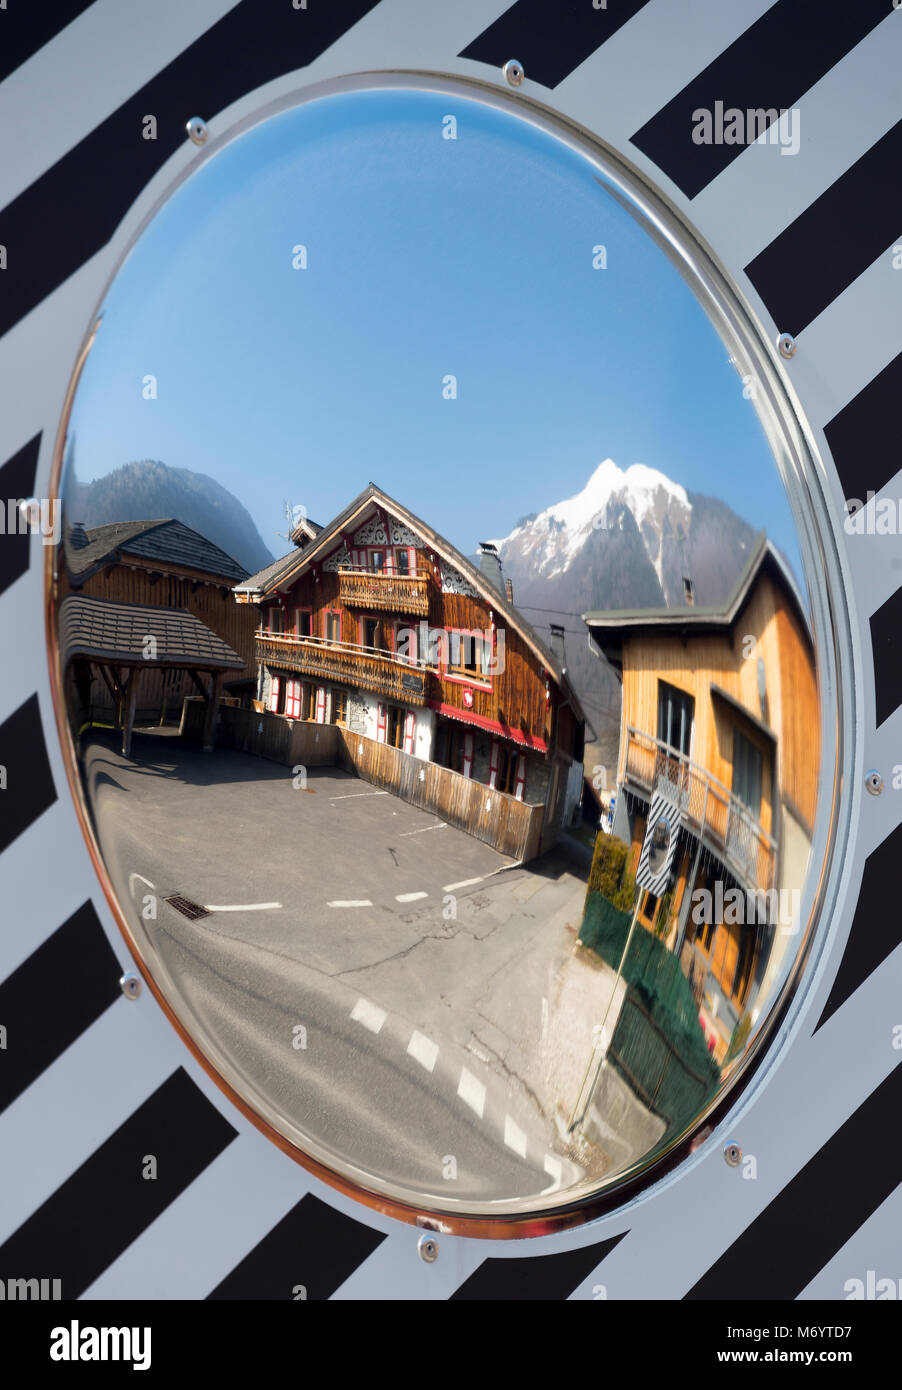 A Mirror Image of Chalets in the Ski Resort of Morzine Haute Savoie Portes du Soleil France with the Snow Covered Mountain Pointe de Nantaux Stock Photo